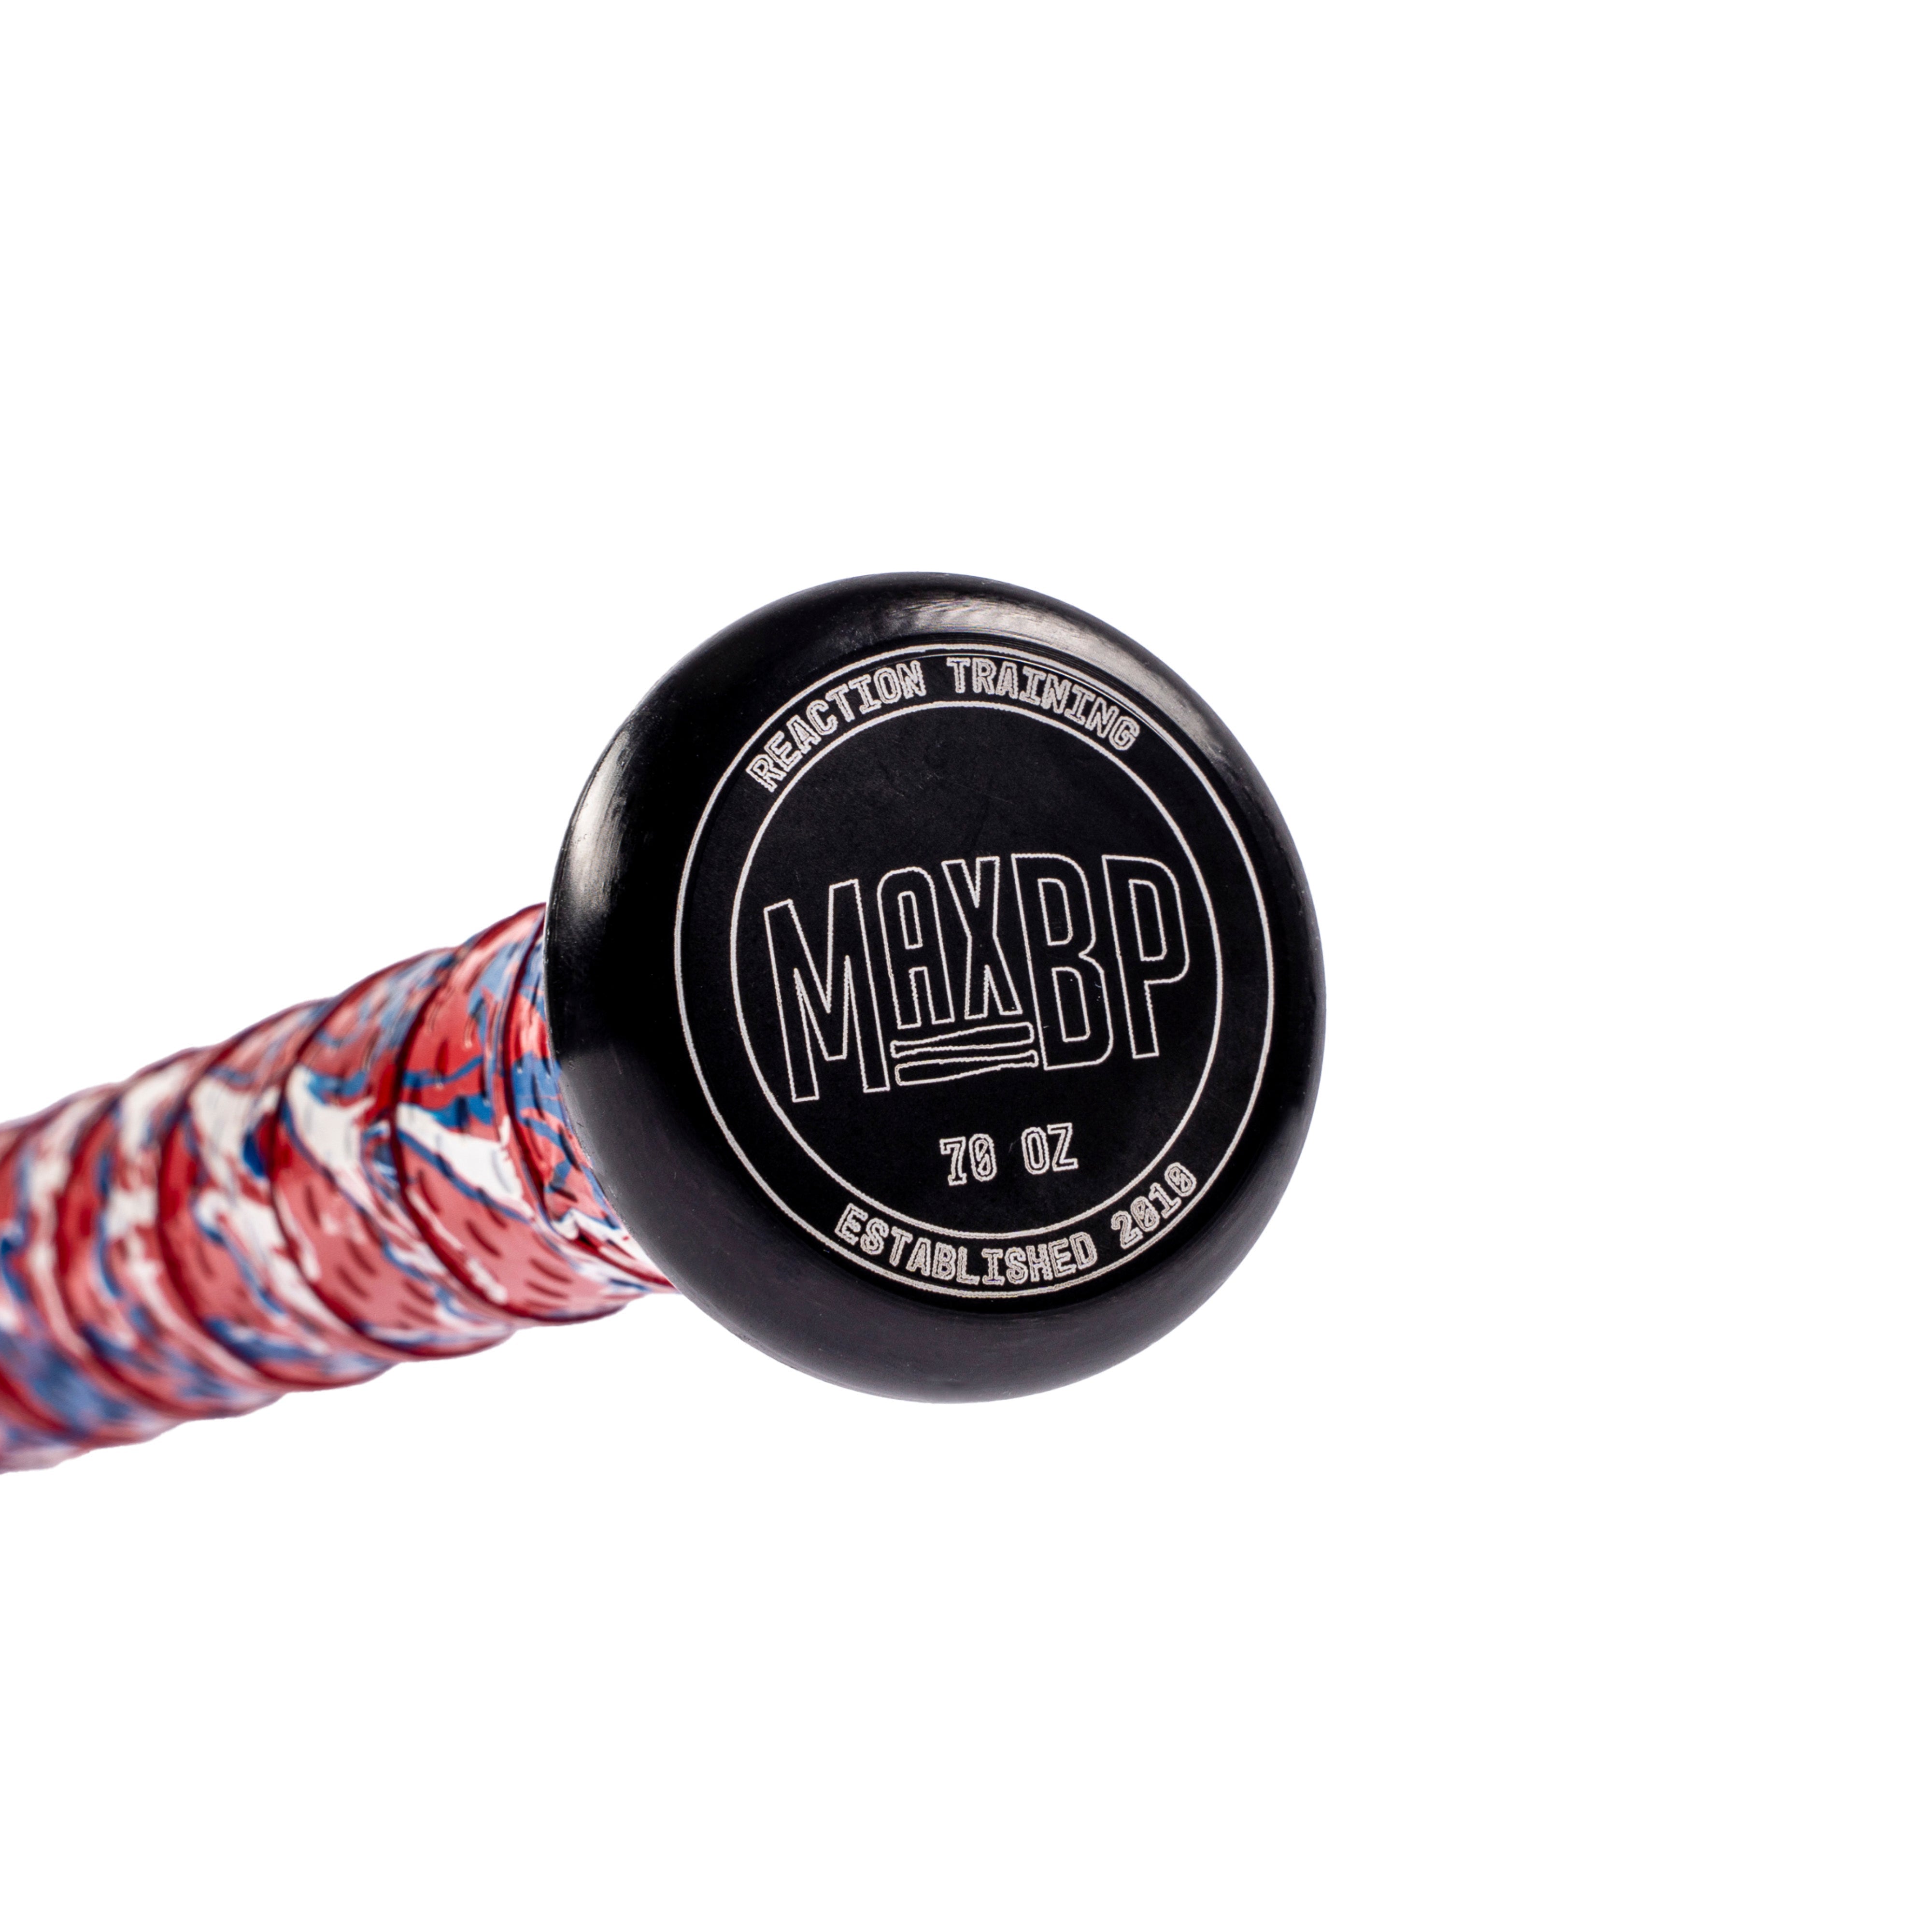 50% off - On-deck Heavy Bat - SPECIAL DEAL